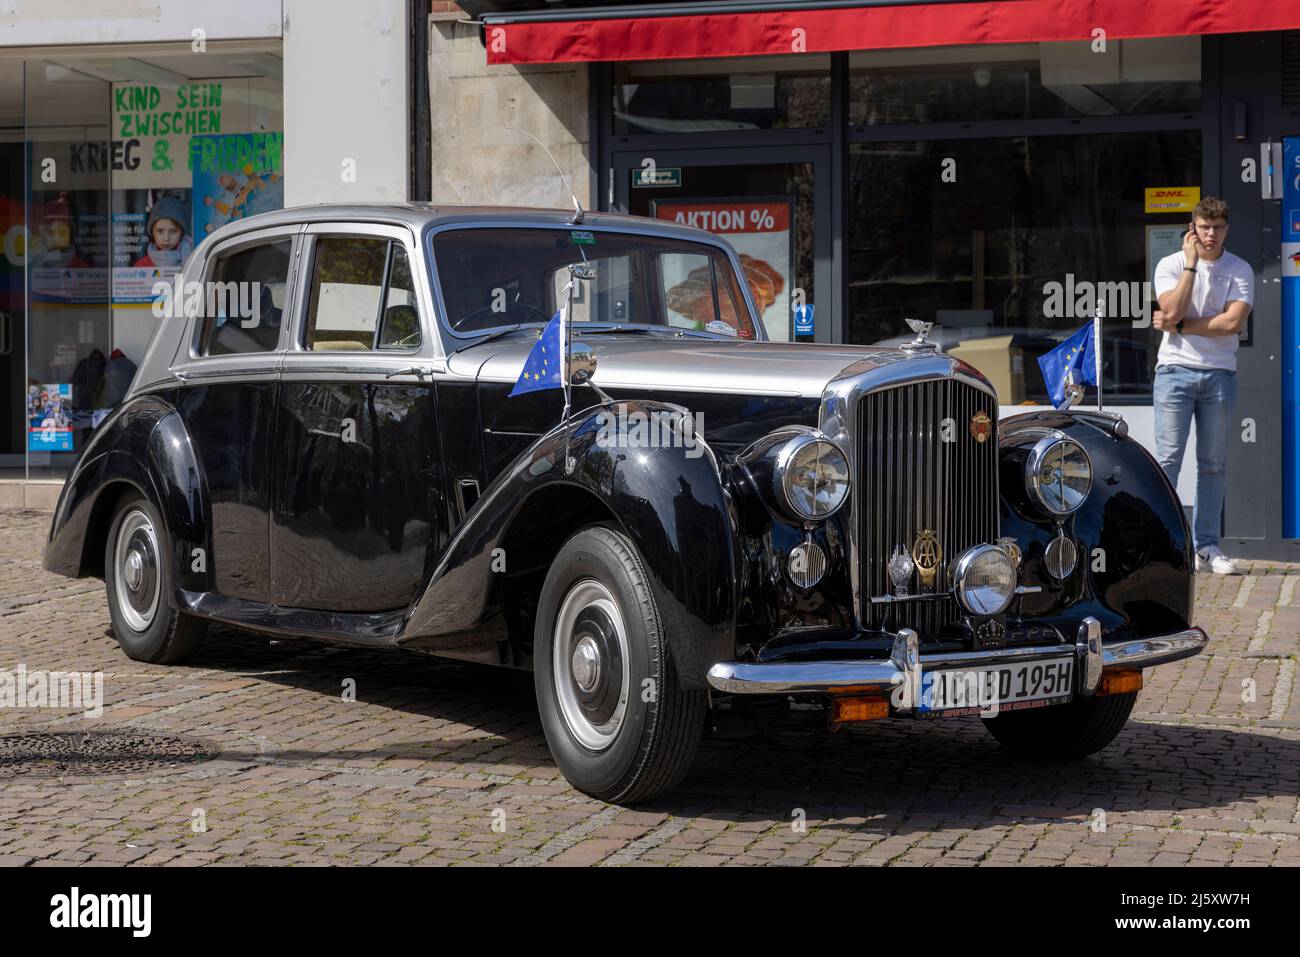 A vintage Rolls Royce car and one person in Aachen, Germany Stock Photo